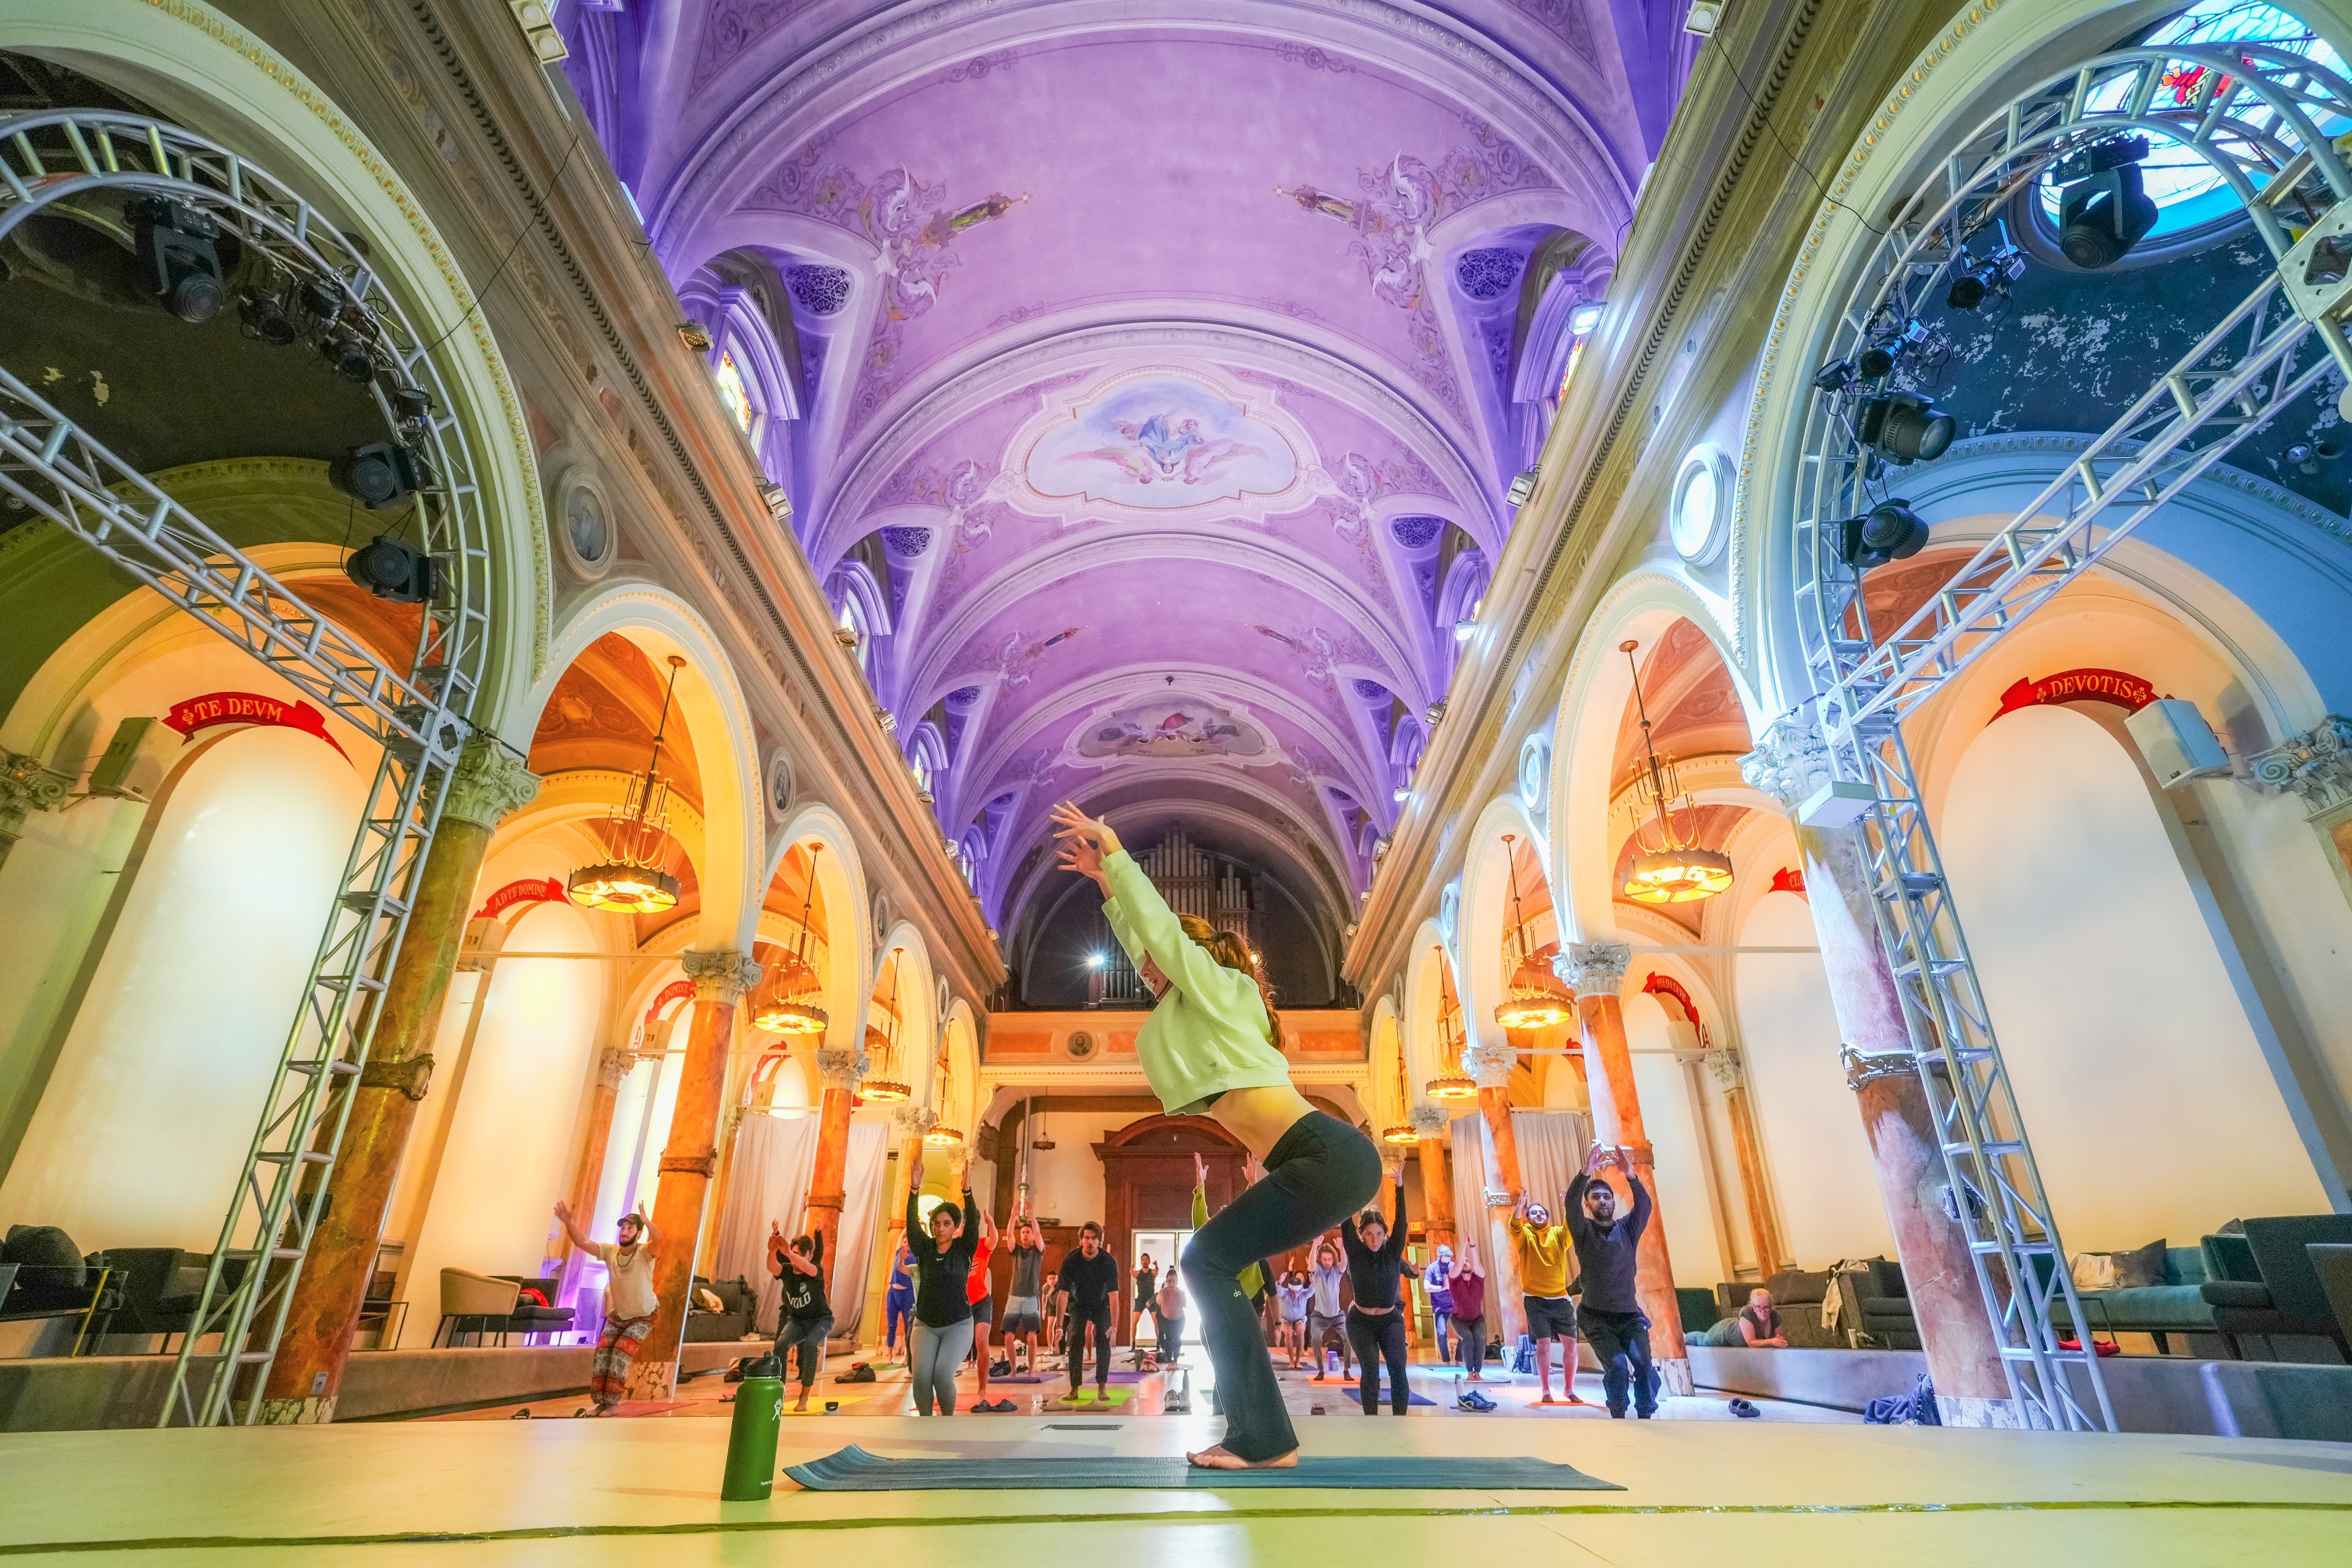 A yoga class inside a grand, ornate hall with violet ceilings, arches, and people in various poses.